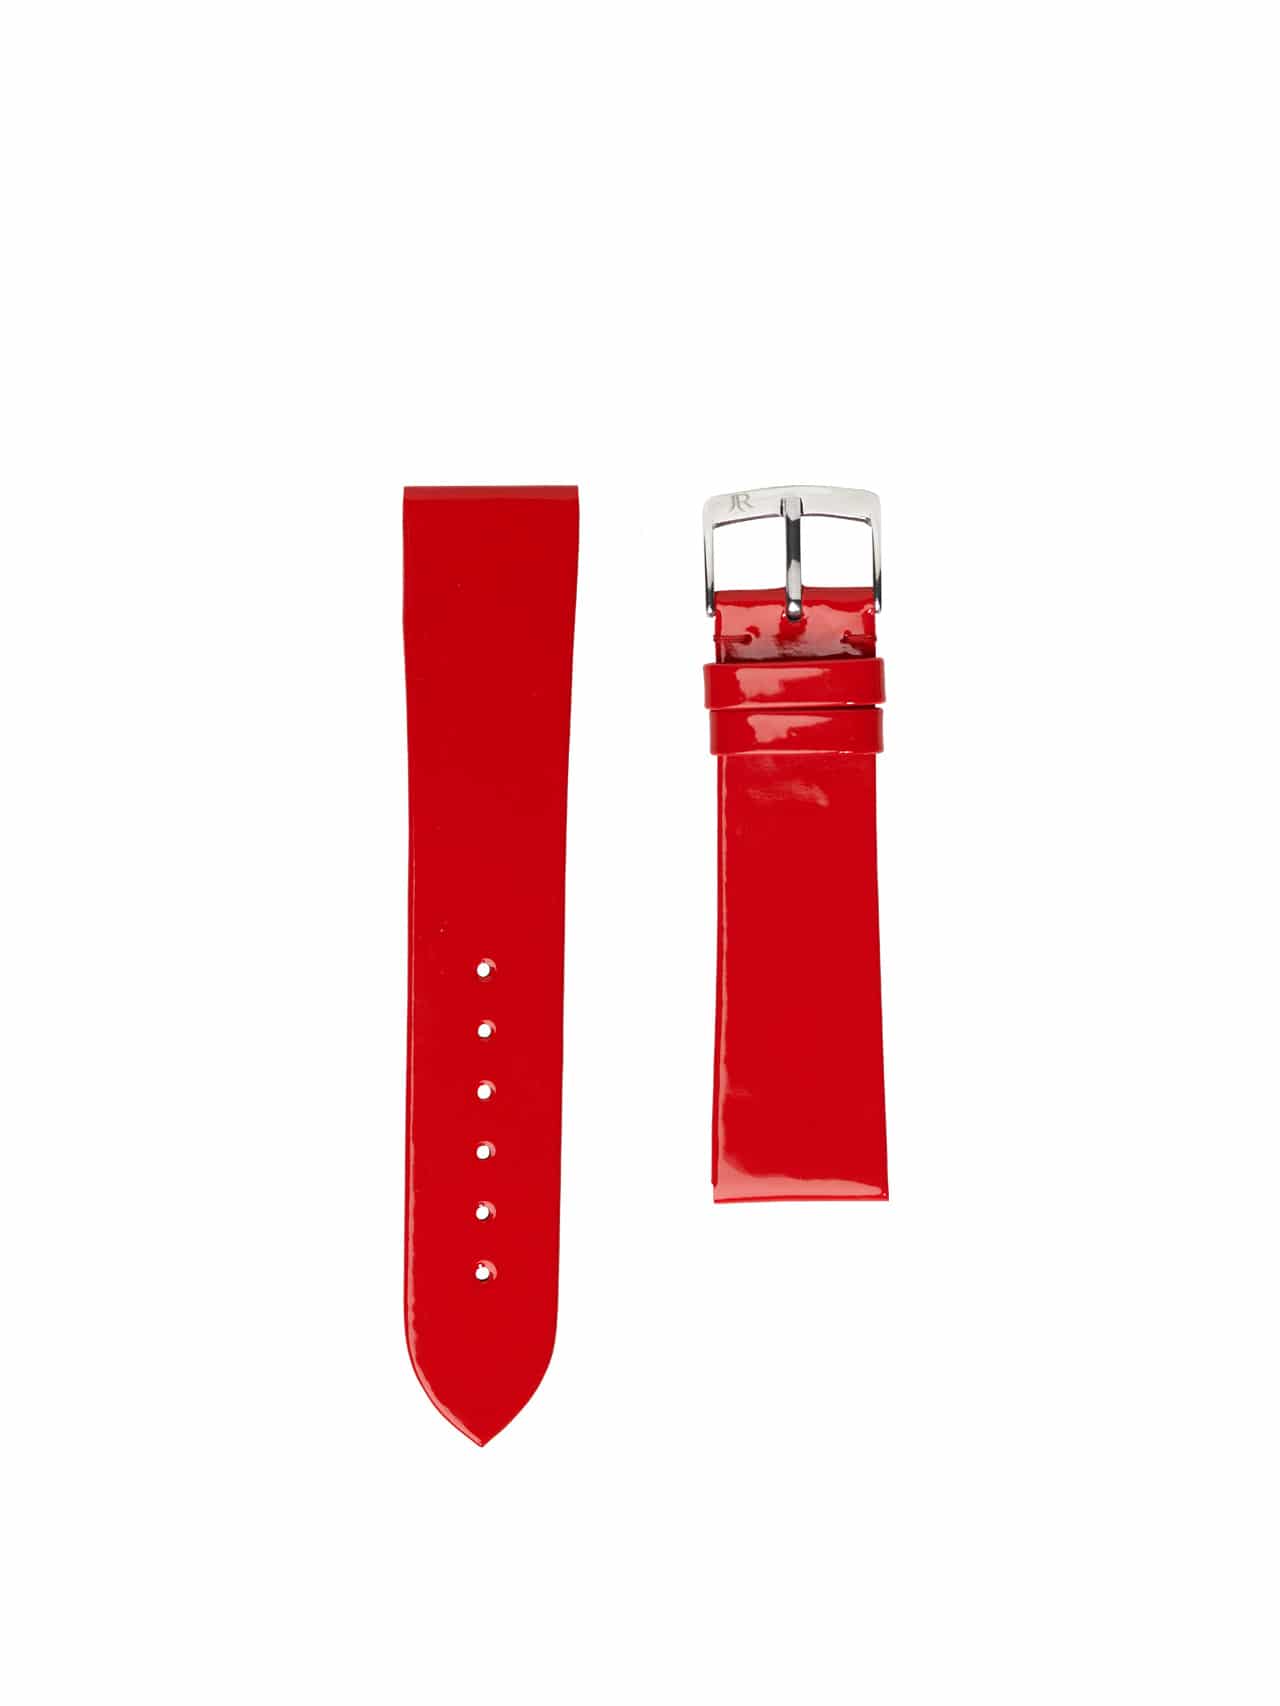 watch band Patent leather red bright women